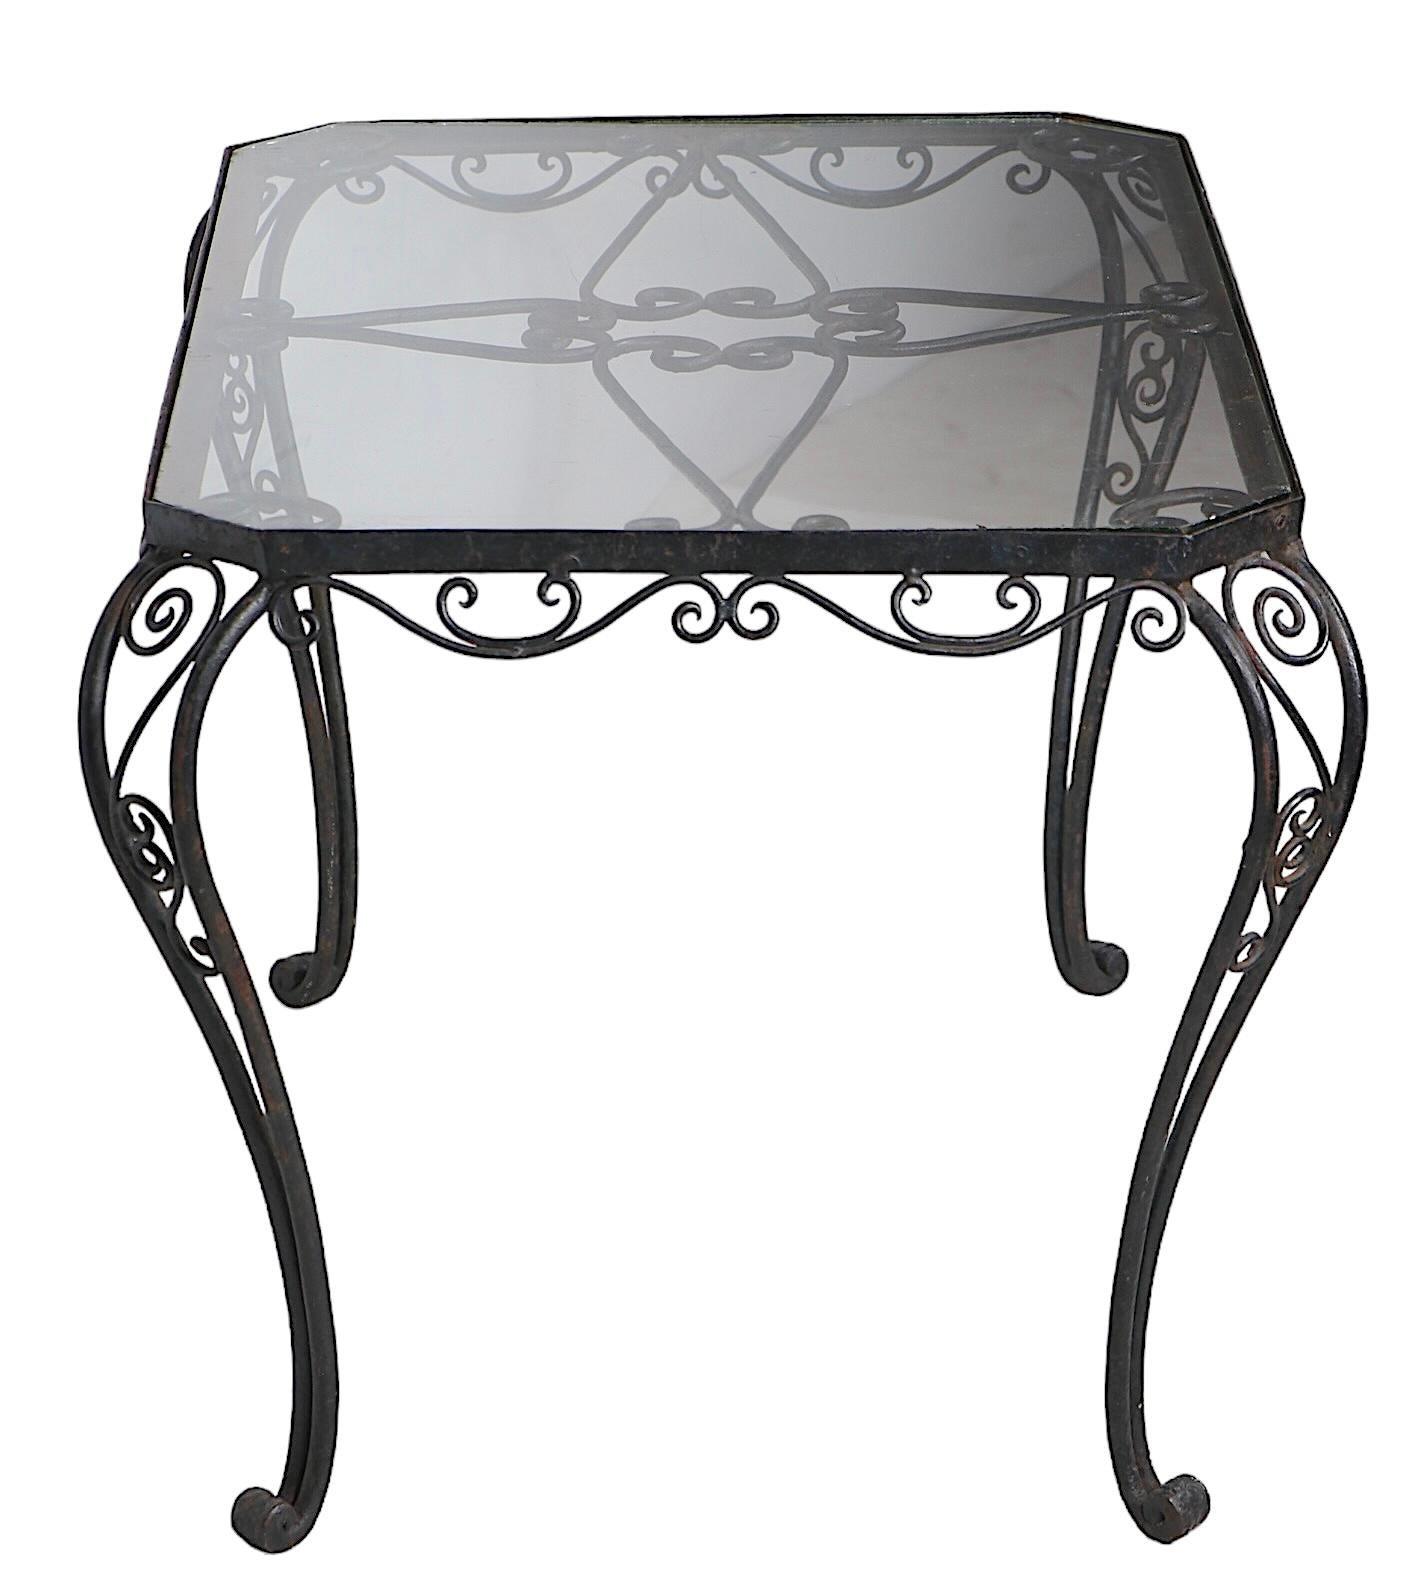 Exceptional ornate wrought iron coffee table with eight sided glass insert top. The table features an intricately wrought frame, which is in very fine, original condition supports the drop in glass top, top shows some flaws notably along the edges,